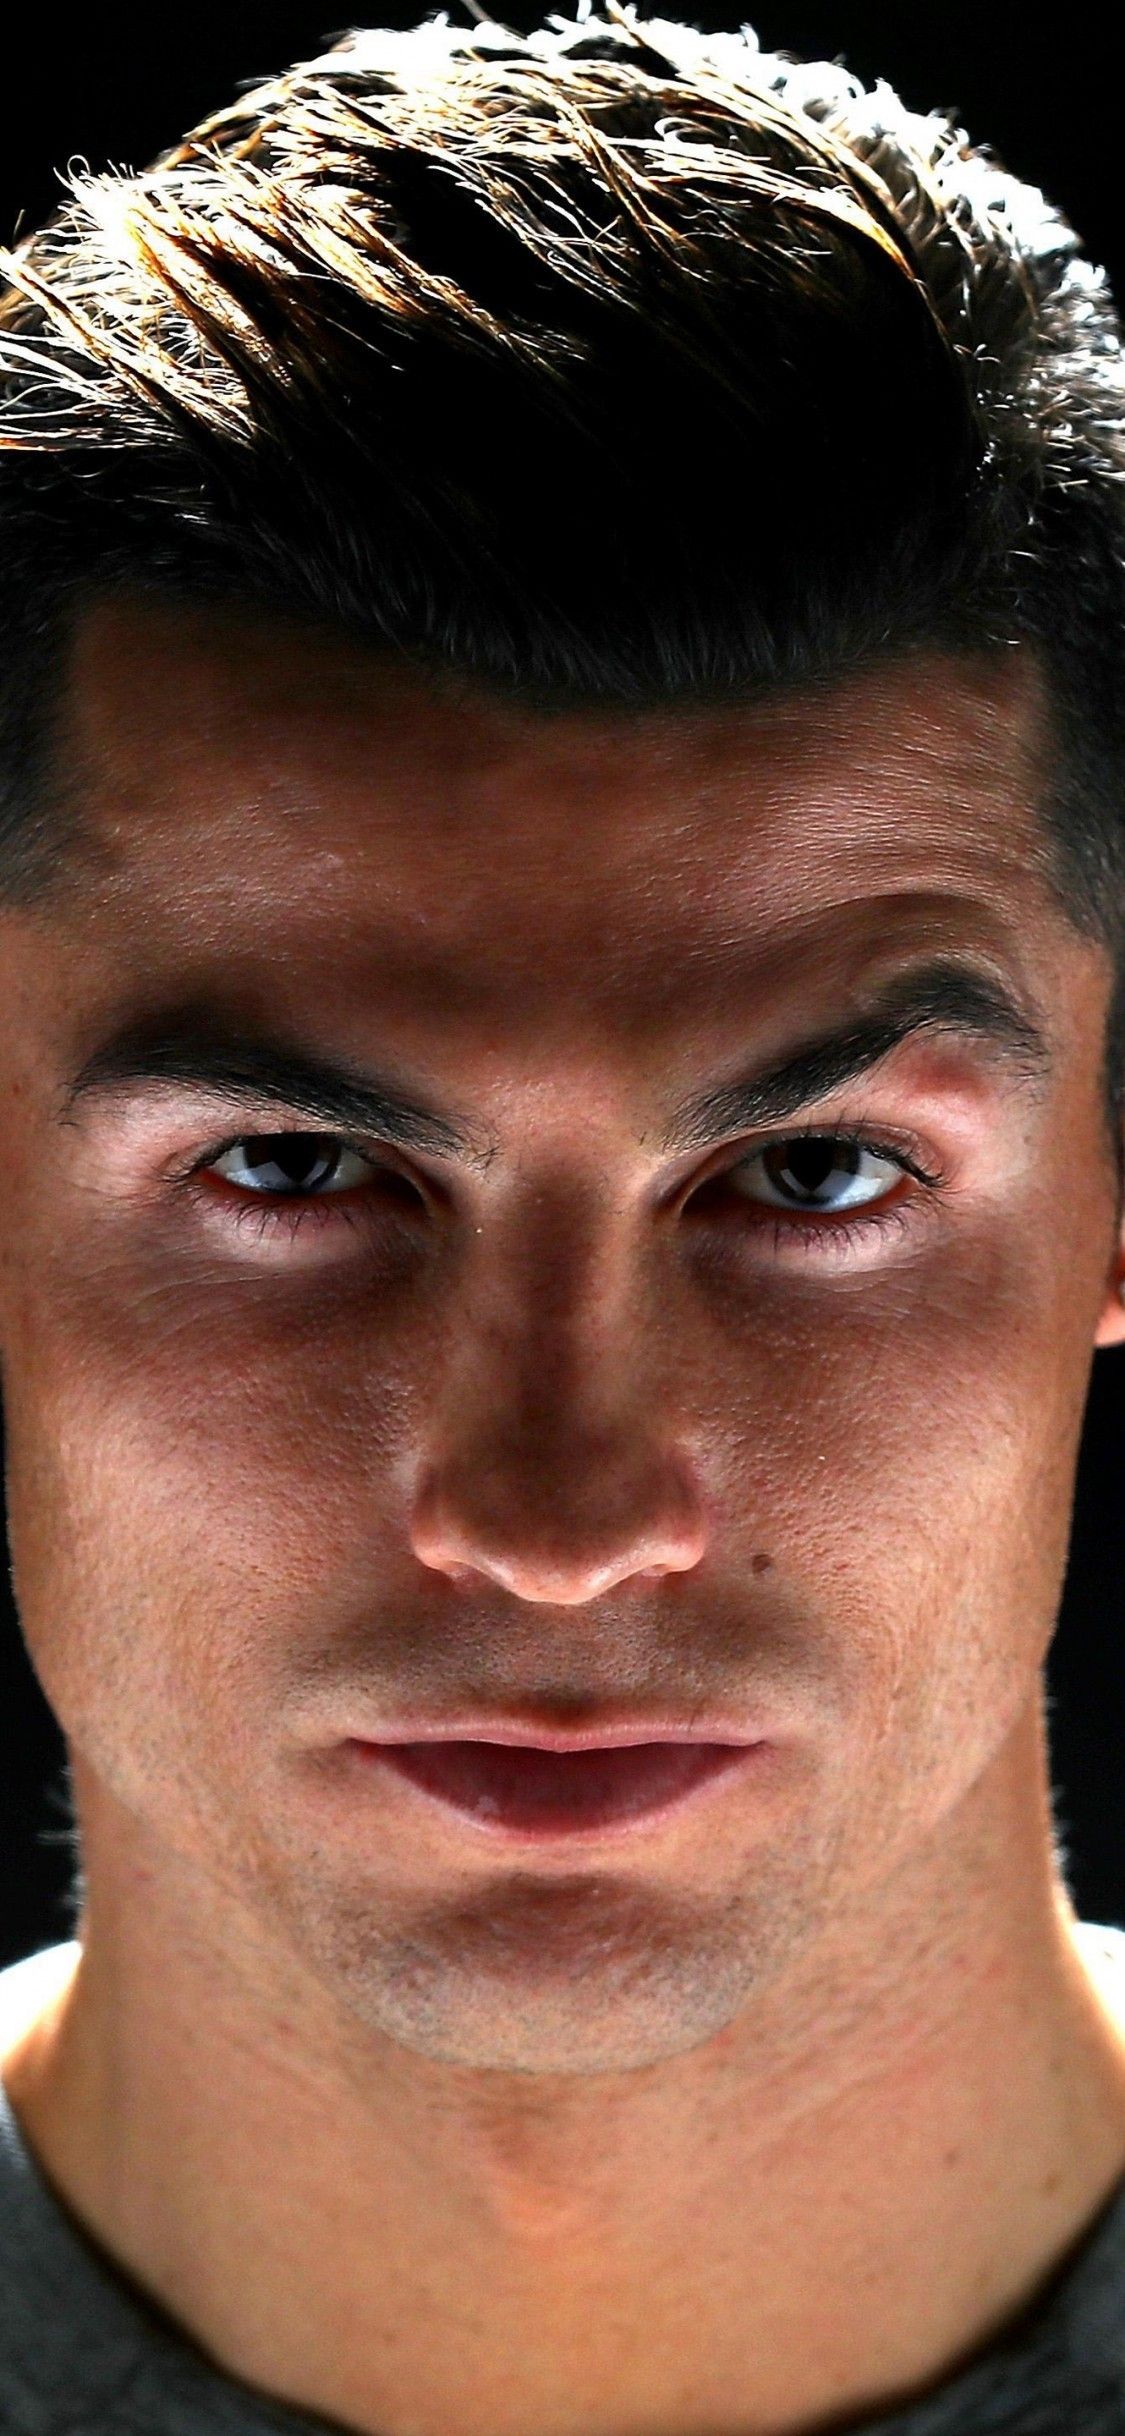 Download 1125x2436 Cristiano Ronaldo, Face Portrait, Earrings Wallpaper for iPhone 11 Pro & X